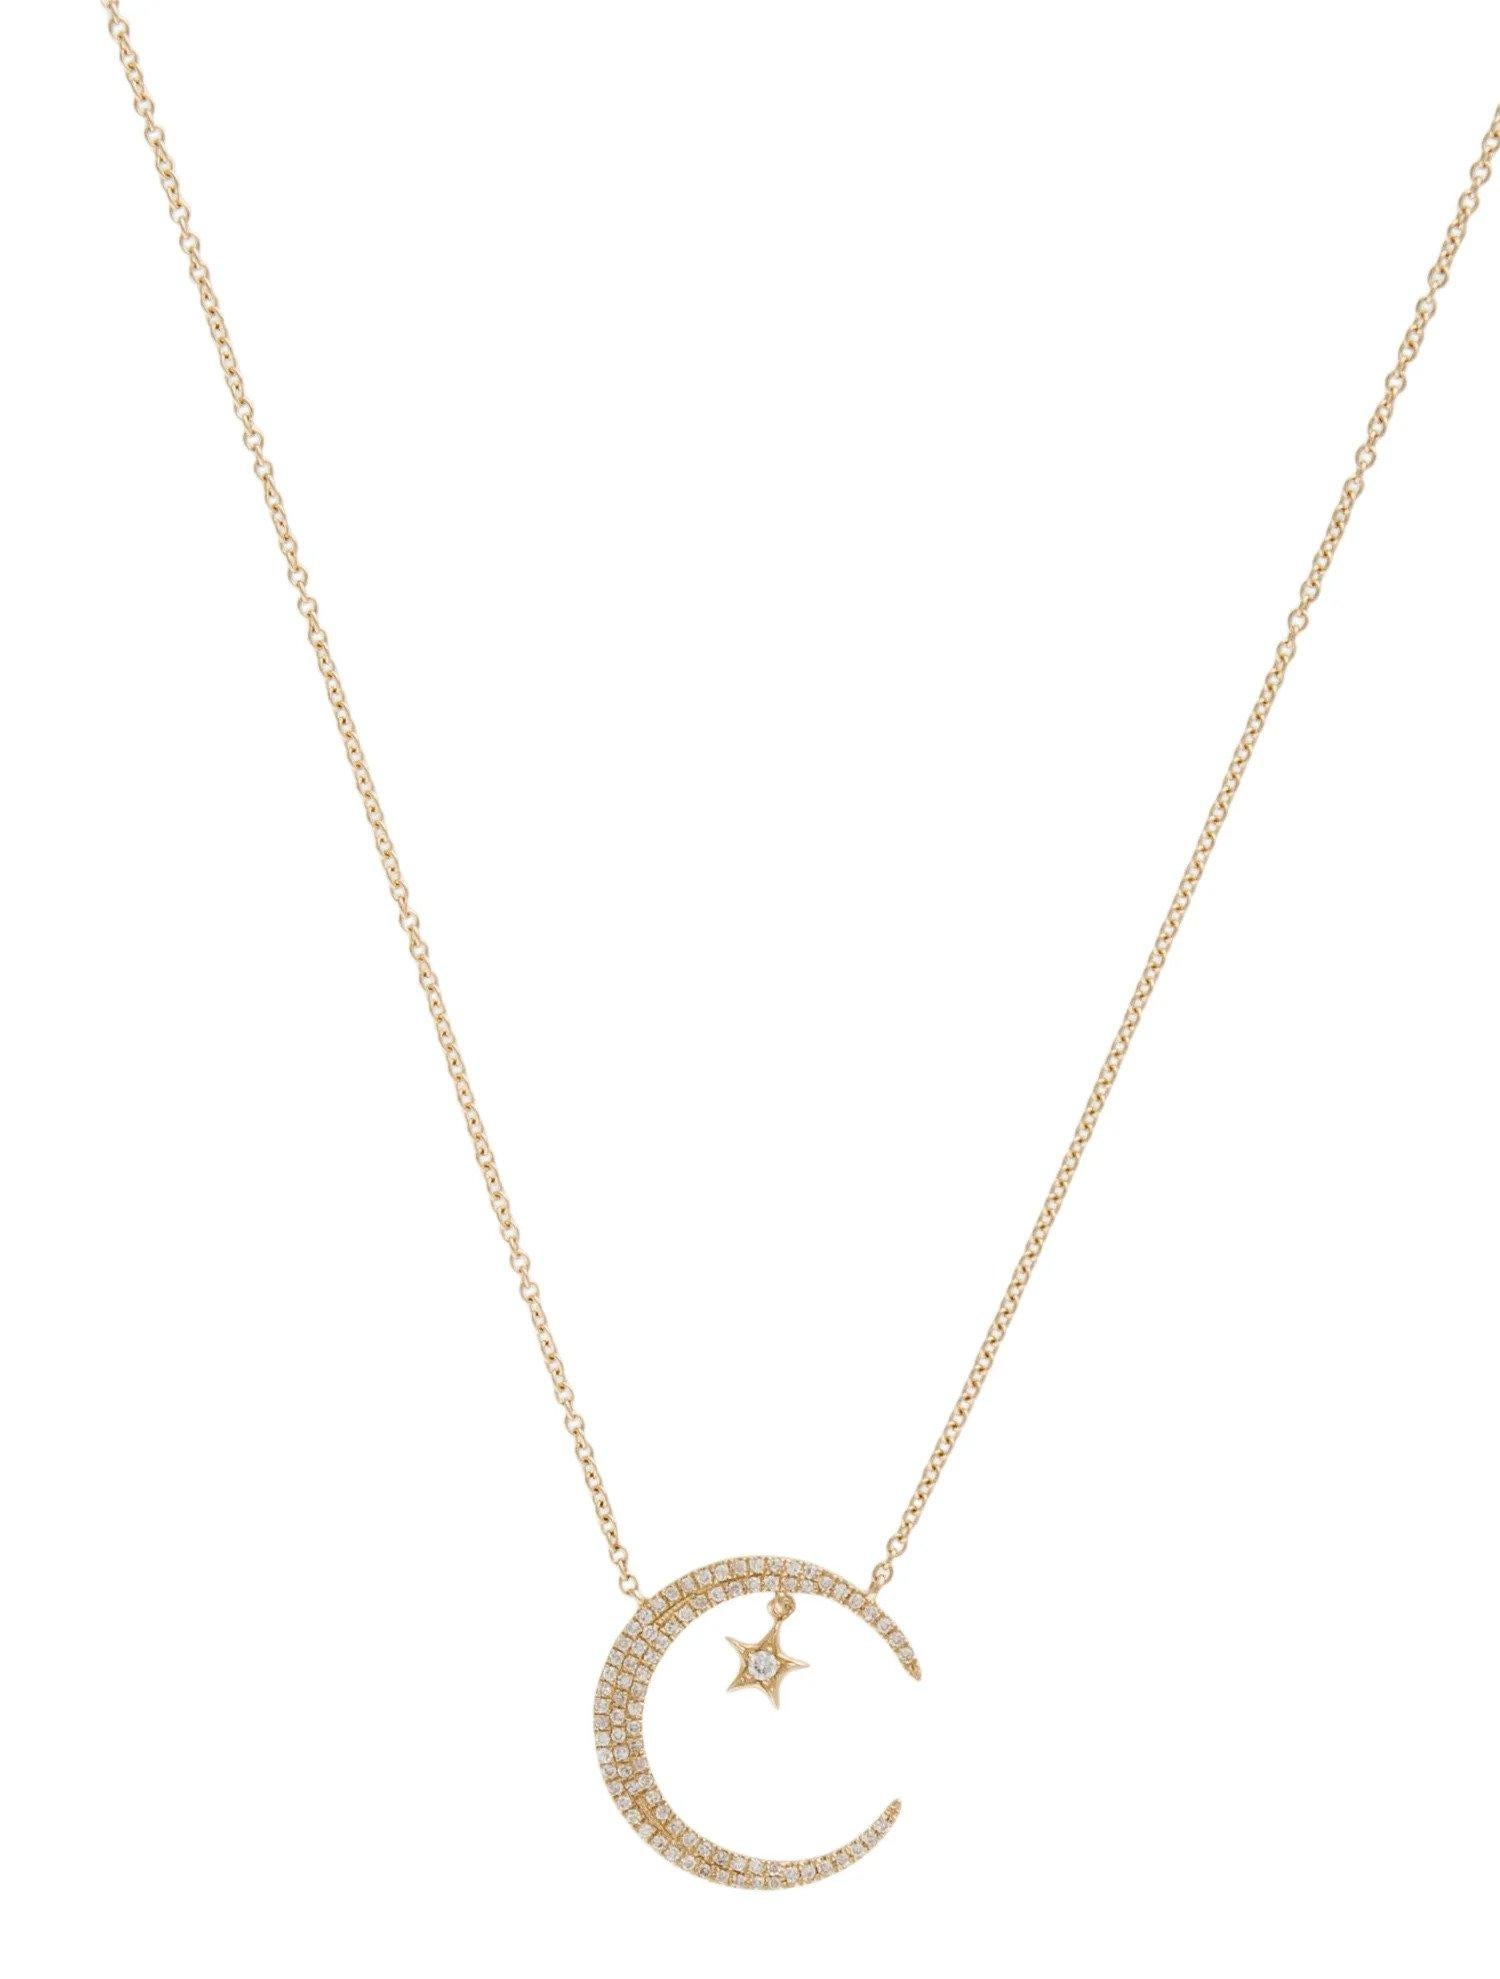 0.25 Carat Diamond Crescent Moon & Star Yellow Gold Pendant Necklace In New Condition For Sale In Great Neck, NY